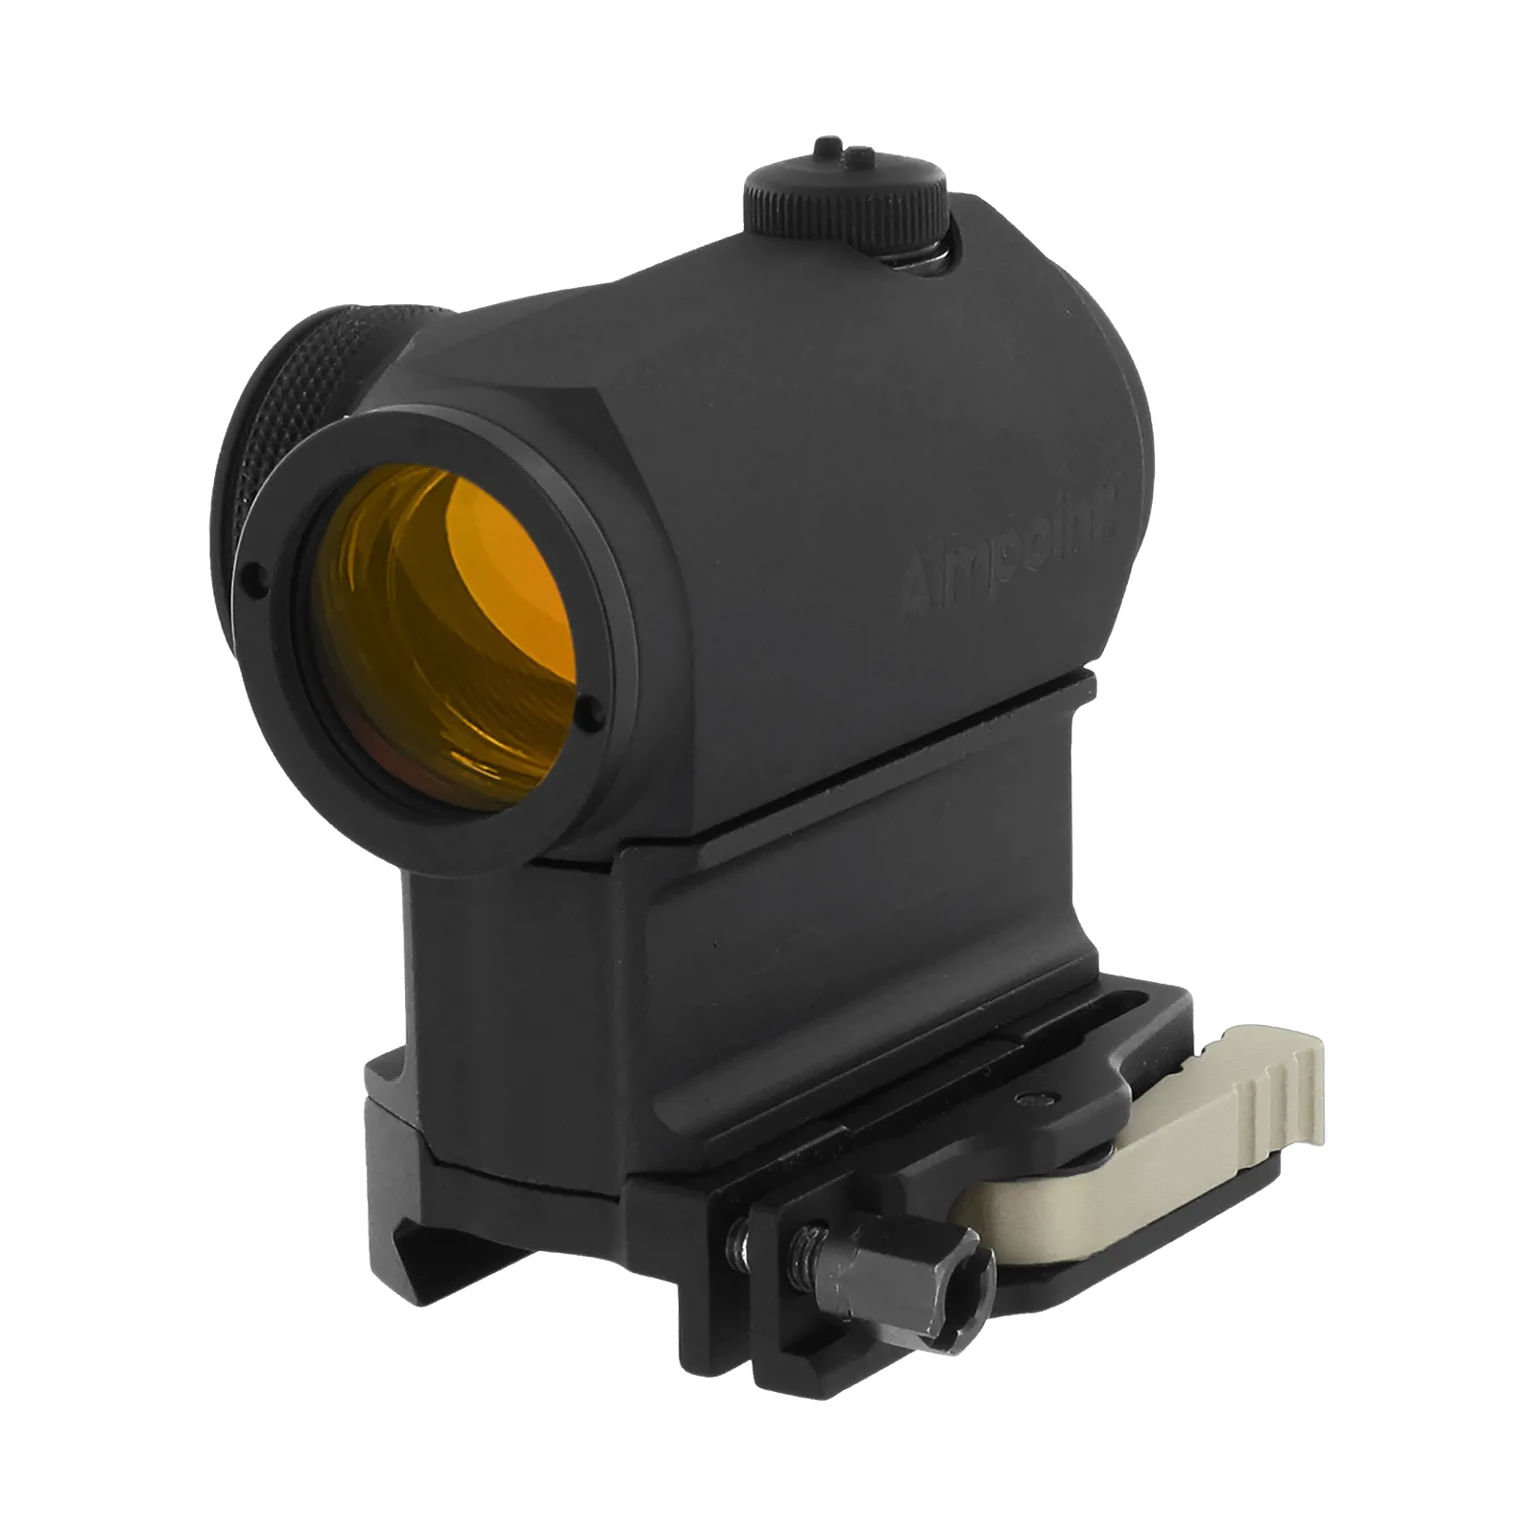 Micro T-1™ 4 MOA - Red dot reflex sight with standard mount for Weaver/Picatinny - 2